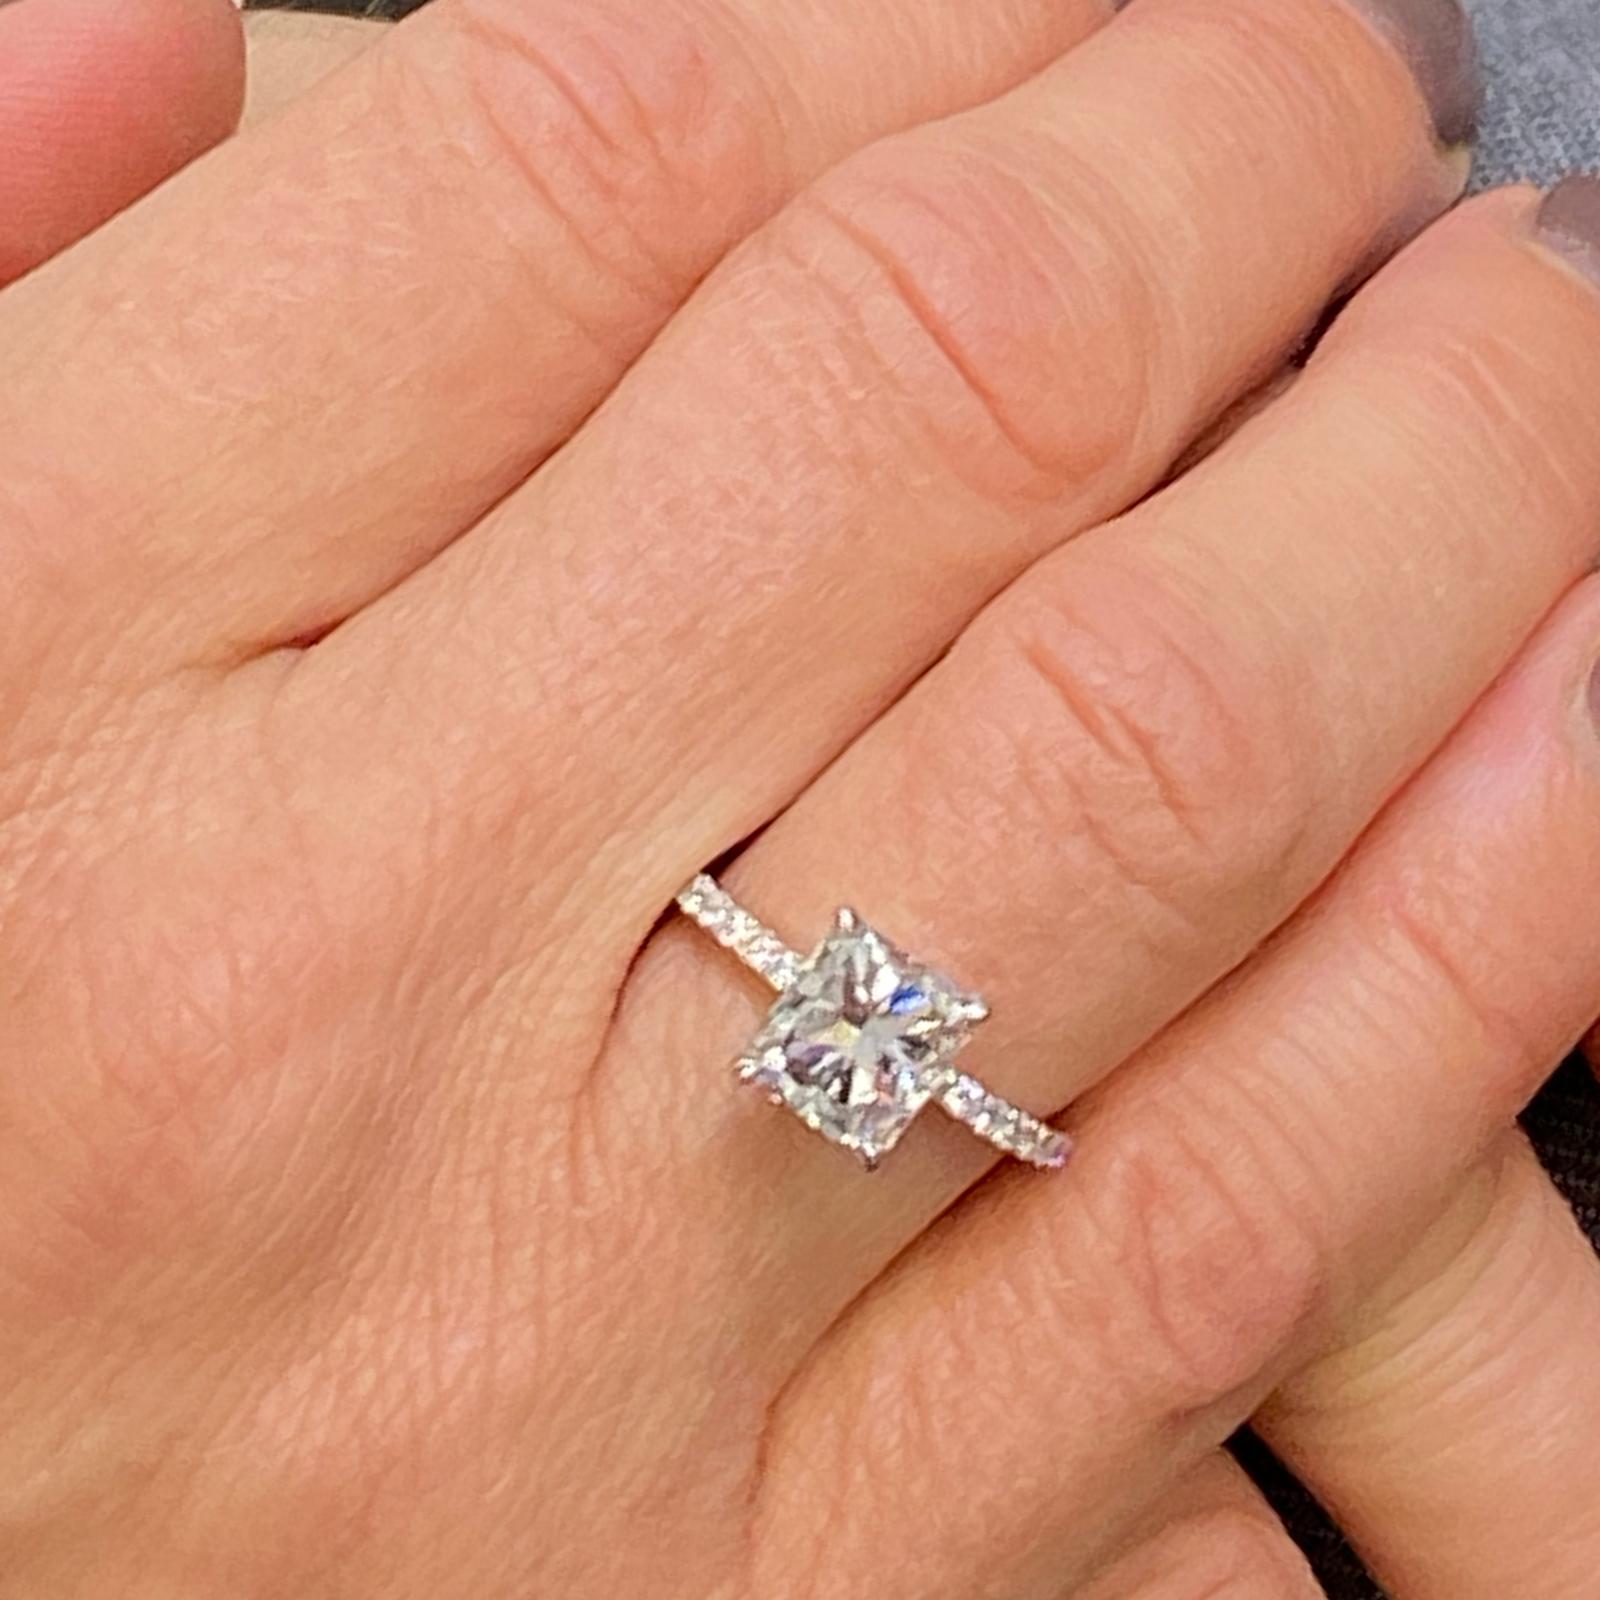 Radiant Diamond Engagement Ring fashioned in 18 karat white gold. The 2.08 carat radiant diamond is graded E color and VS1 clarity by the GIA. The diamond is set in an elegant modern diamond band featuring 28 round brilliant cut diamonds weighing